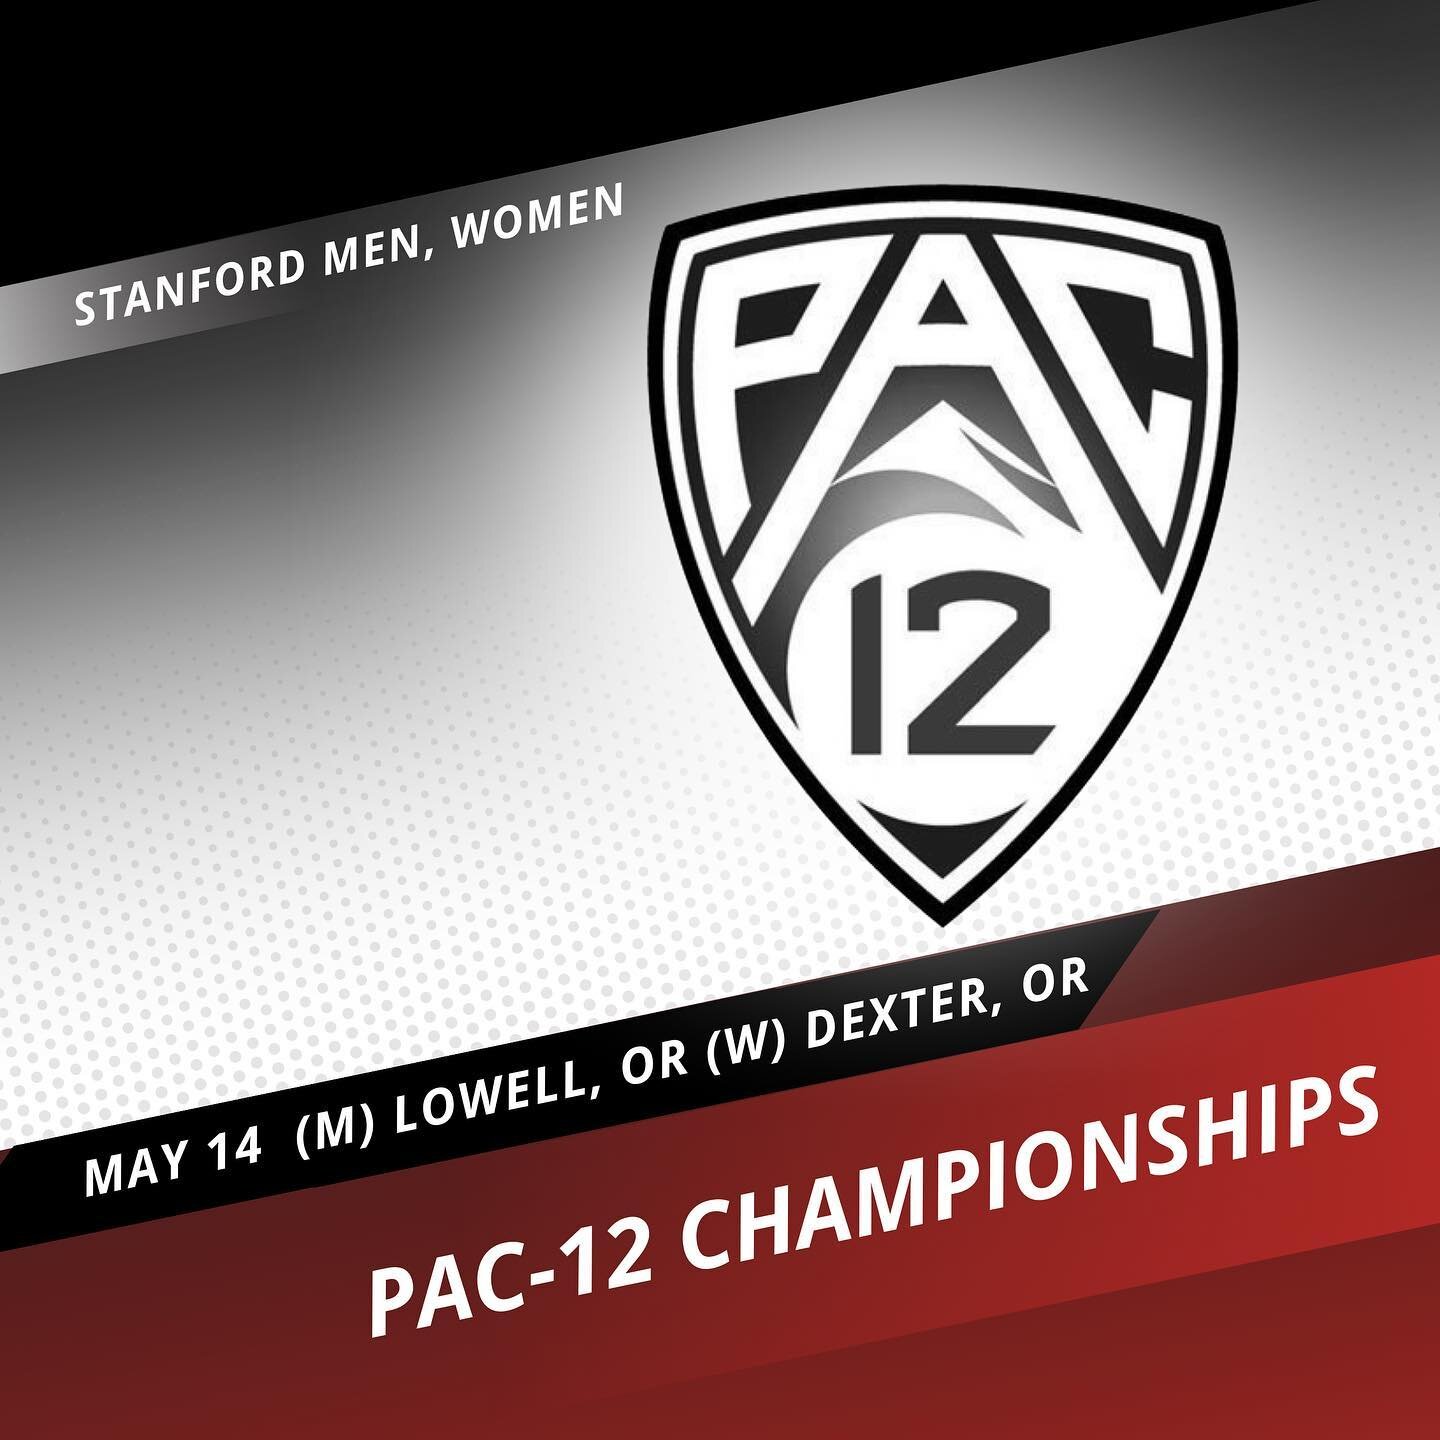 This weekend, the #8 Stanford Men and #4 Stanford Openweight Women will compete at PAC-12s in Dexter Lake, outside Eugene, OR.

@stanfordwcrew are expected to defend their championship title, but nothing can be taken for granted.

@stanfordmrowing ha